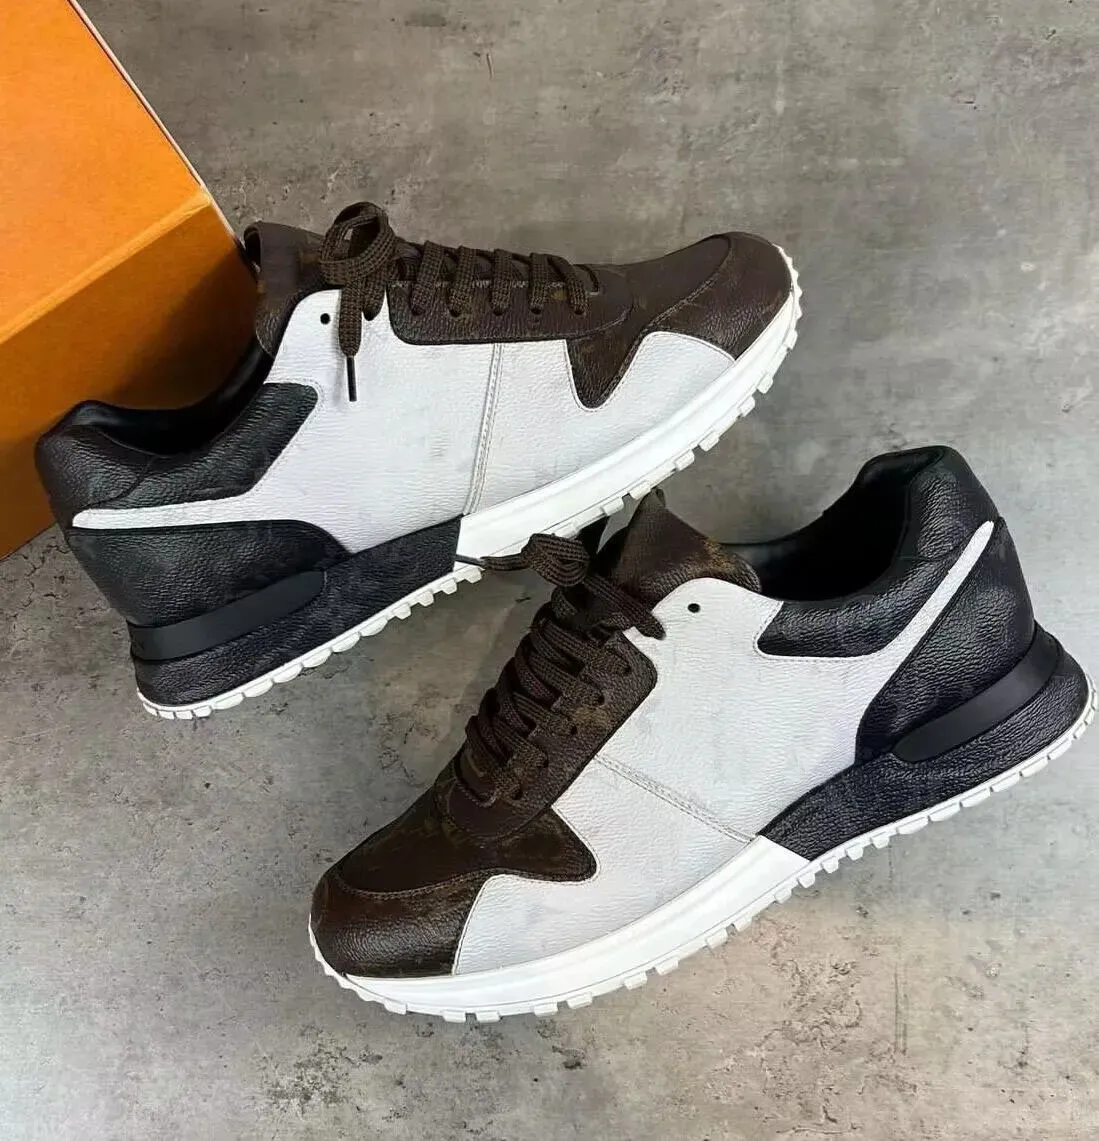 2024 Classic Design Men Run Away Trainers Shoes Brown Black Grained Calfskin Leather Sneakers Technical Plate-forme Party Wedding Dress Runner Sports Shoe EU35-46